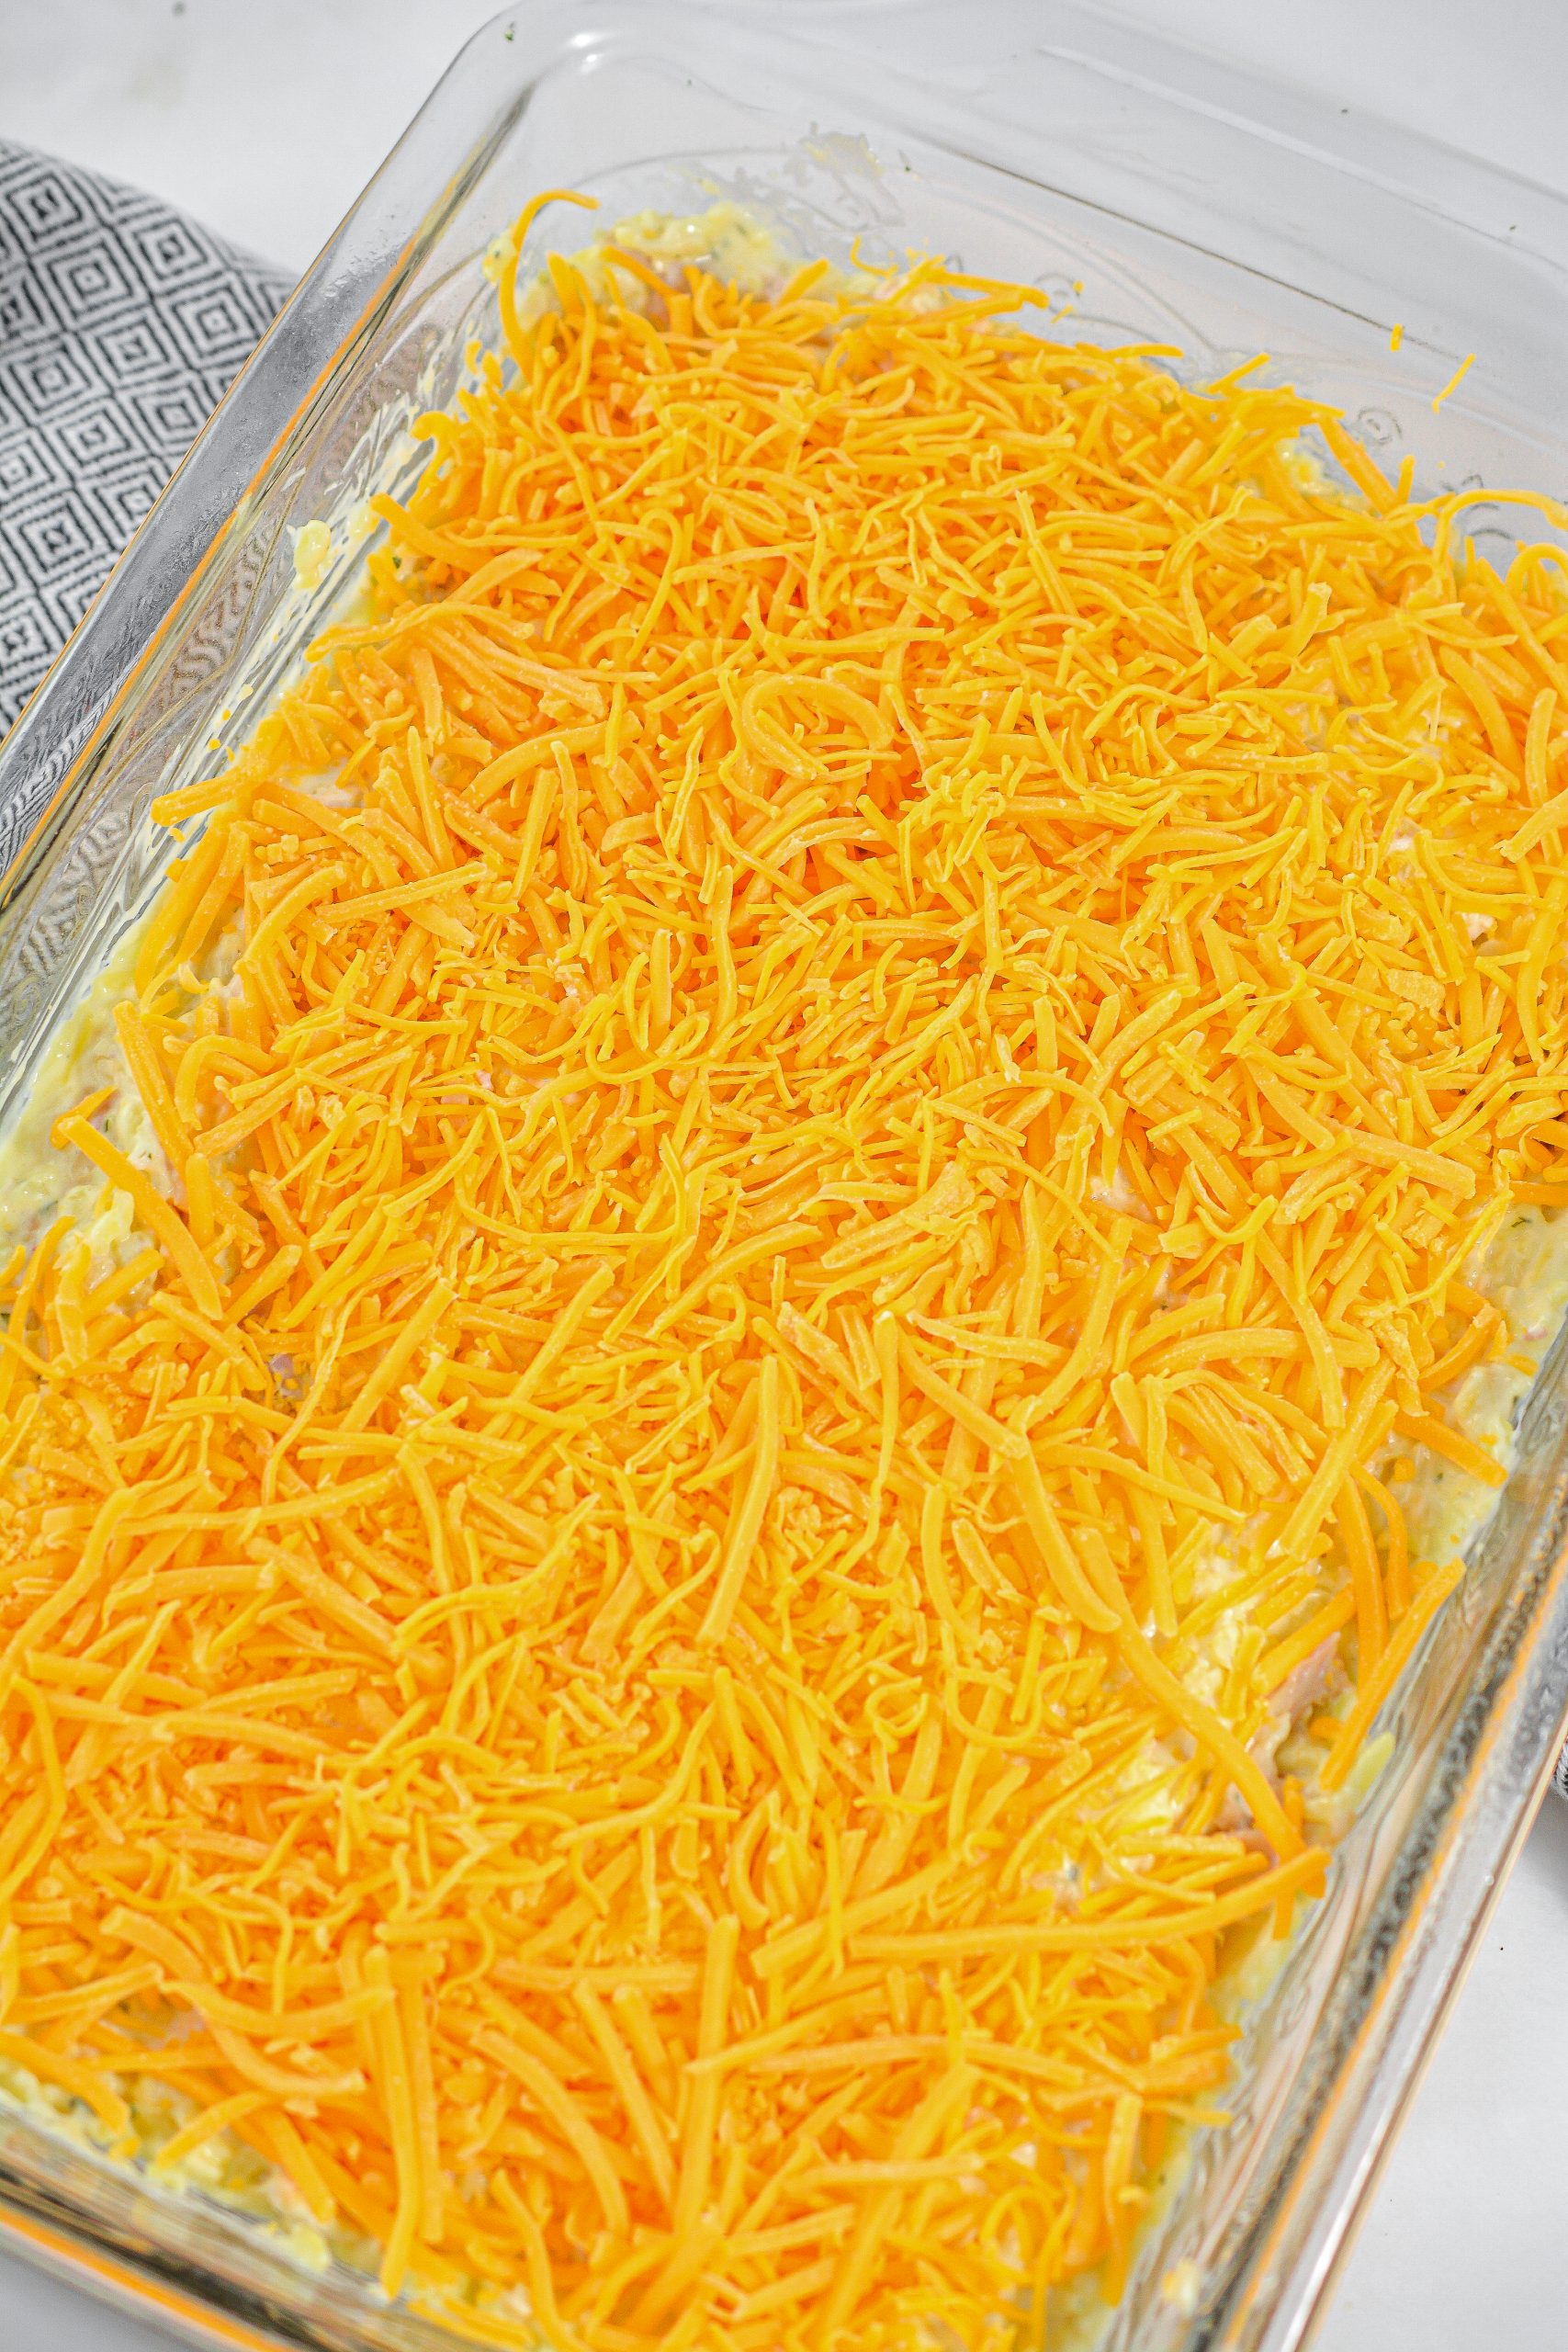 Top with shredded cheese and bake for 40 minutes.